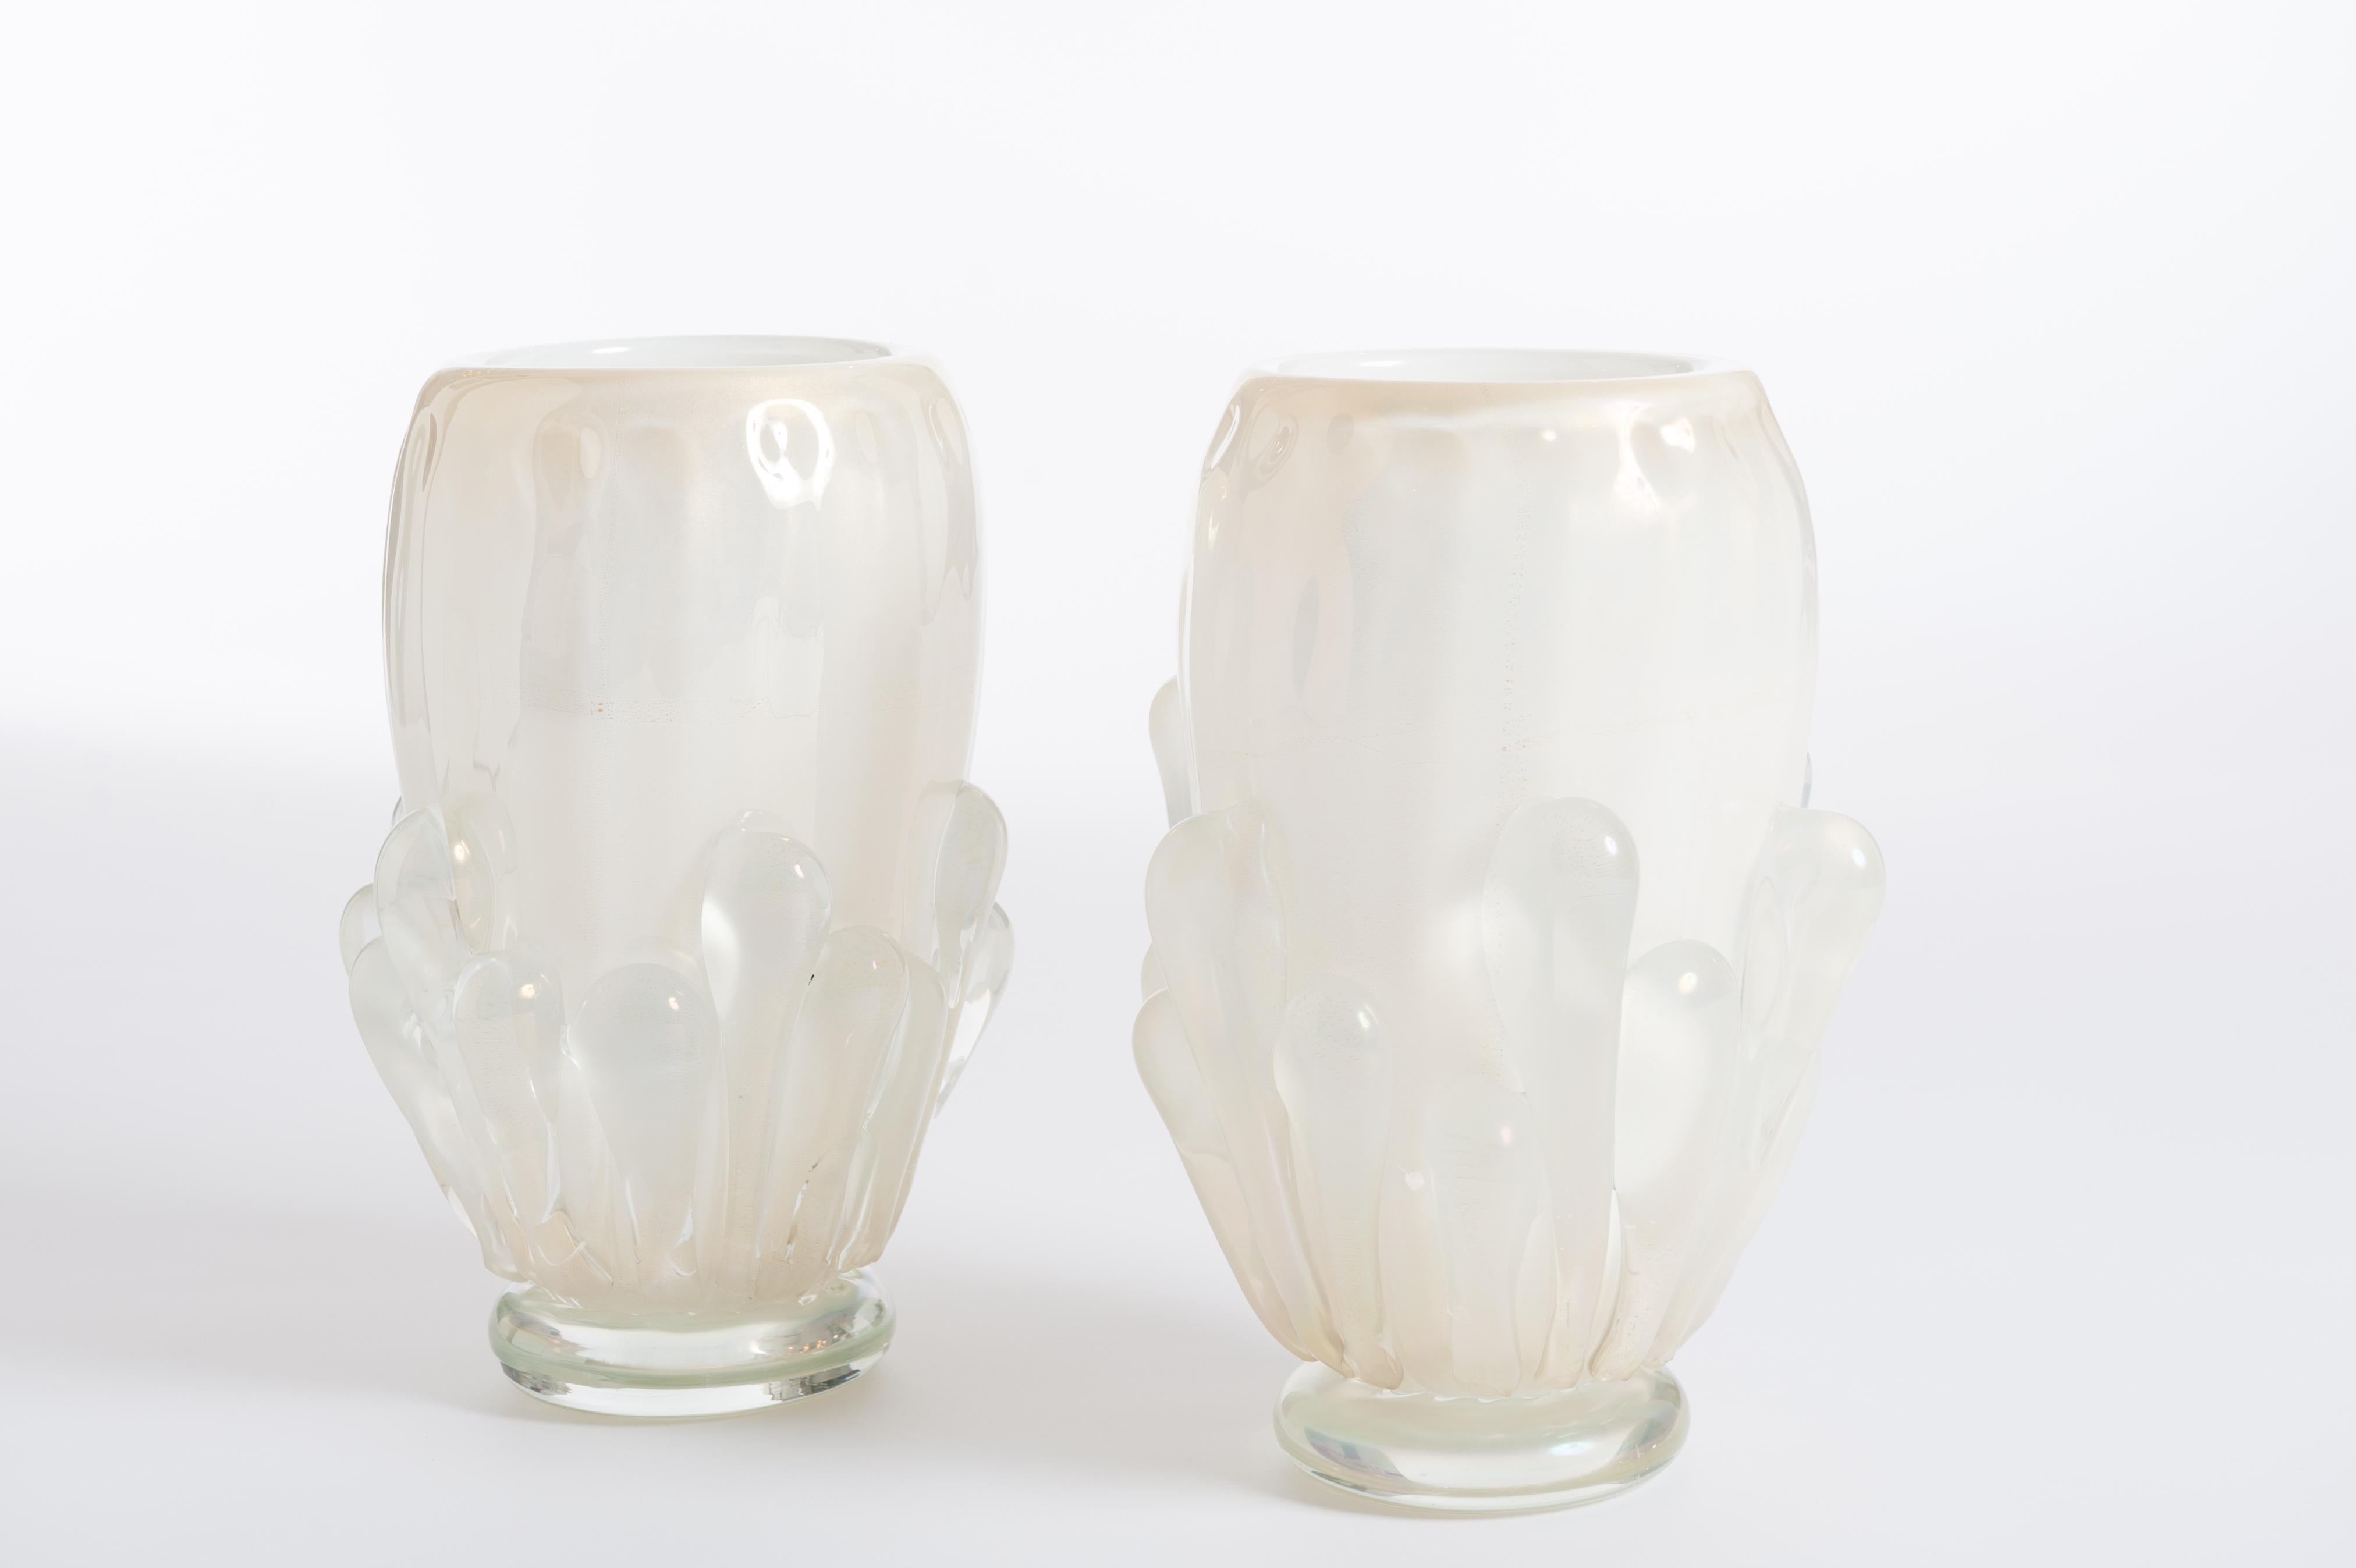 A pair of modern ribbed Italian Murano opal glass vases gold-white-iriscent colored with surreal impression.
Murano handblown vases made by prestigious Italian glassblower, Sergio Costantini. 
The conic shaped body shows enormous glass drops outside